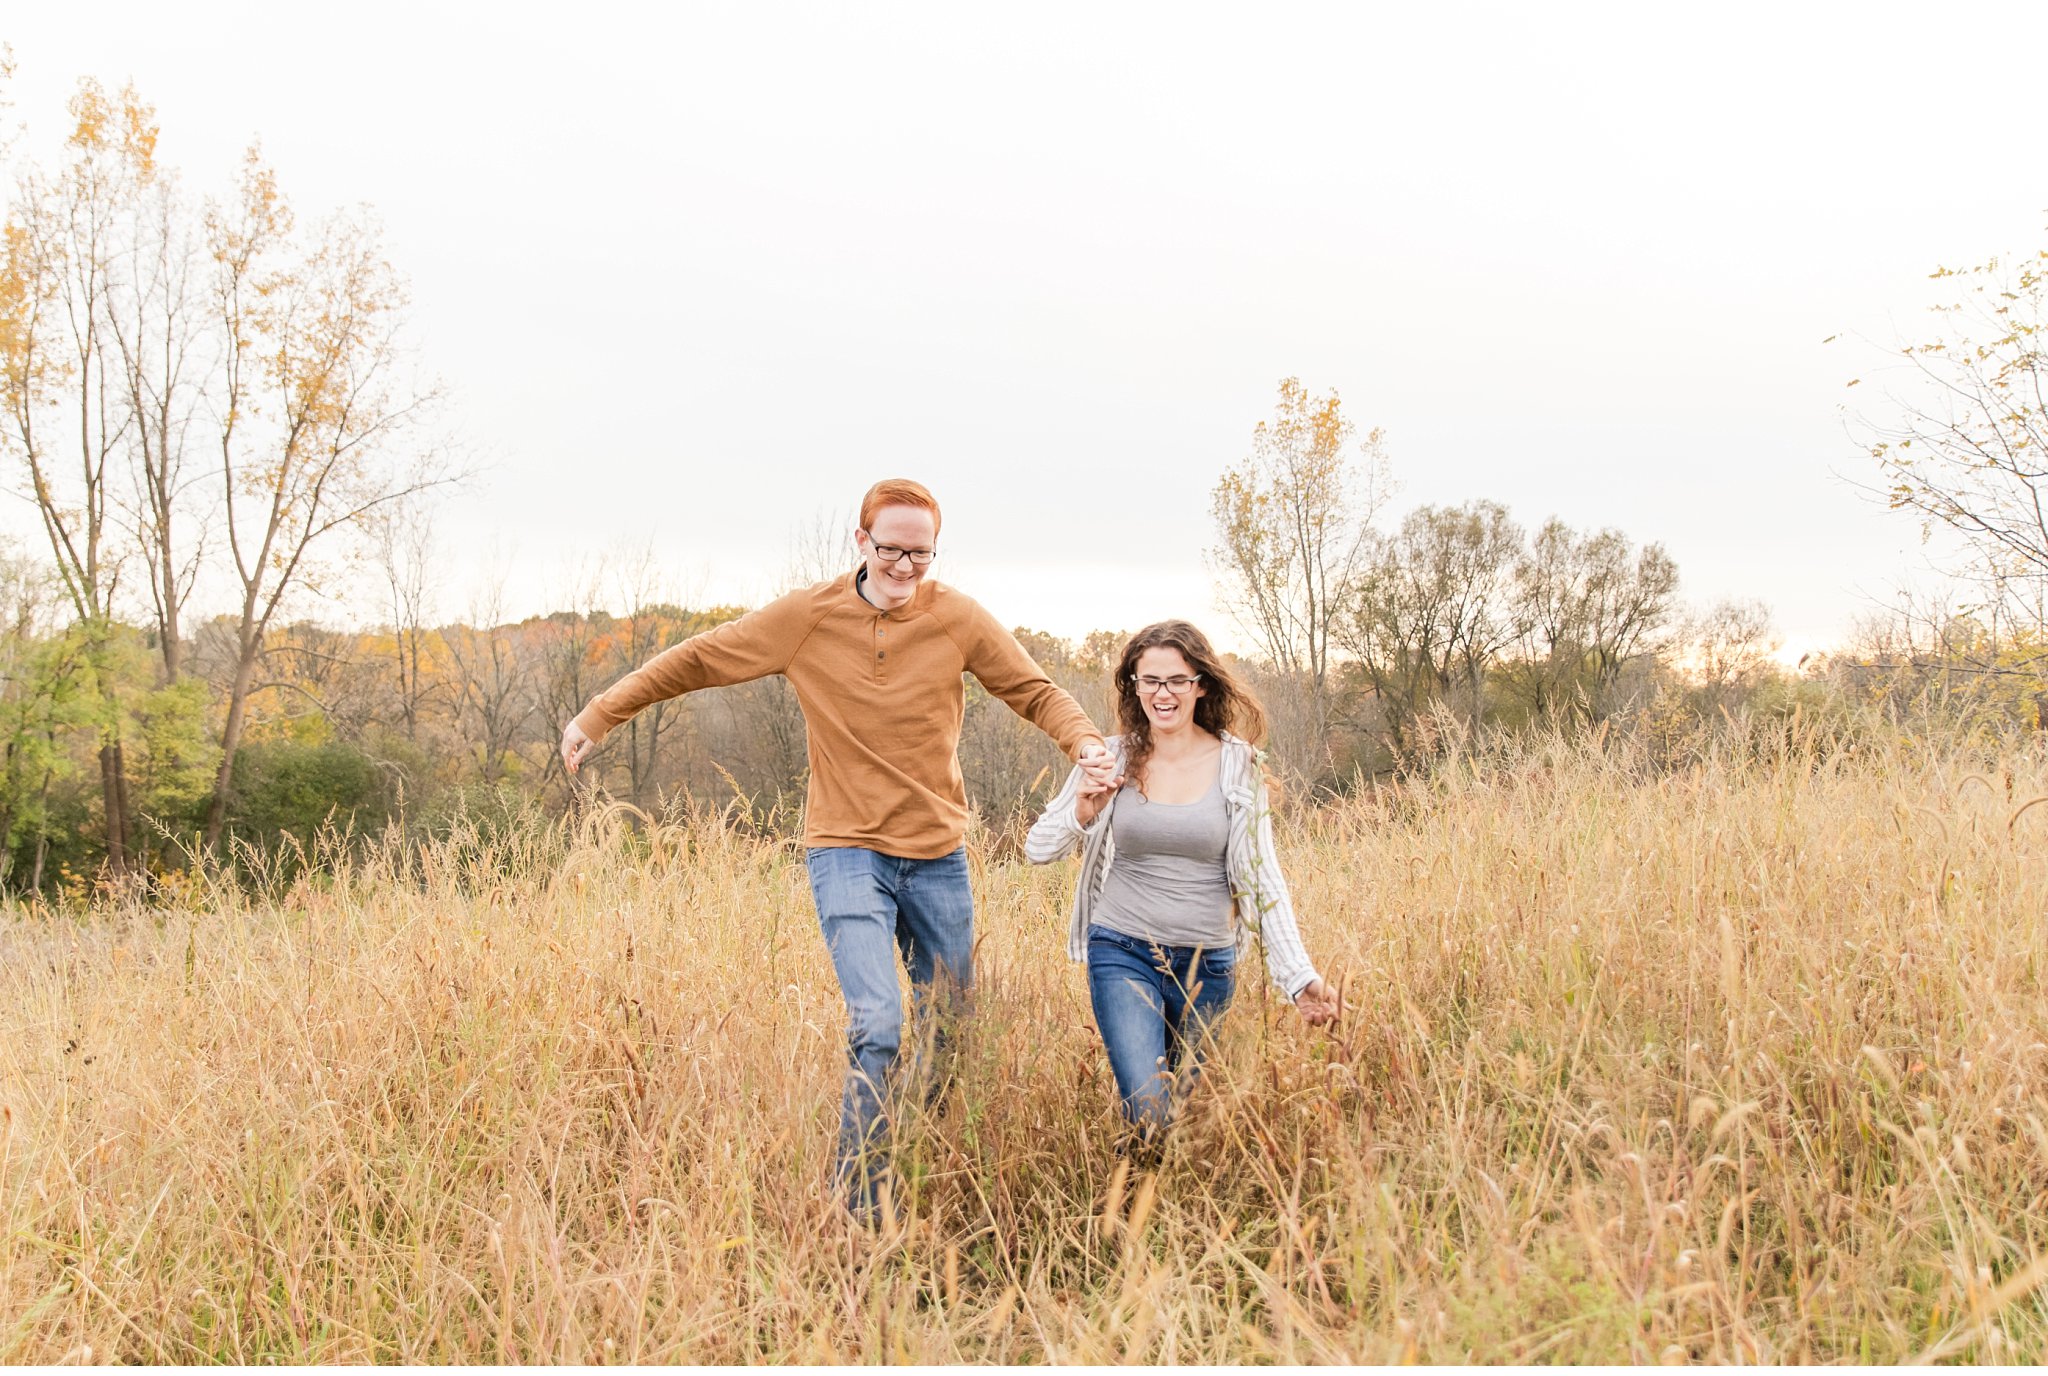 A couple running through a field together during their engagement session